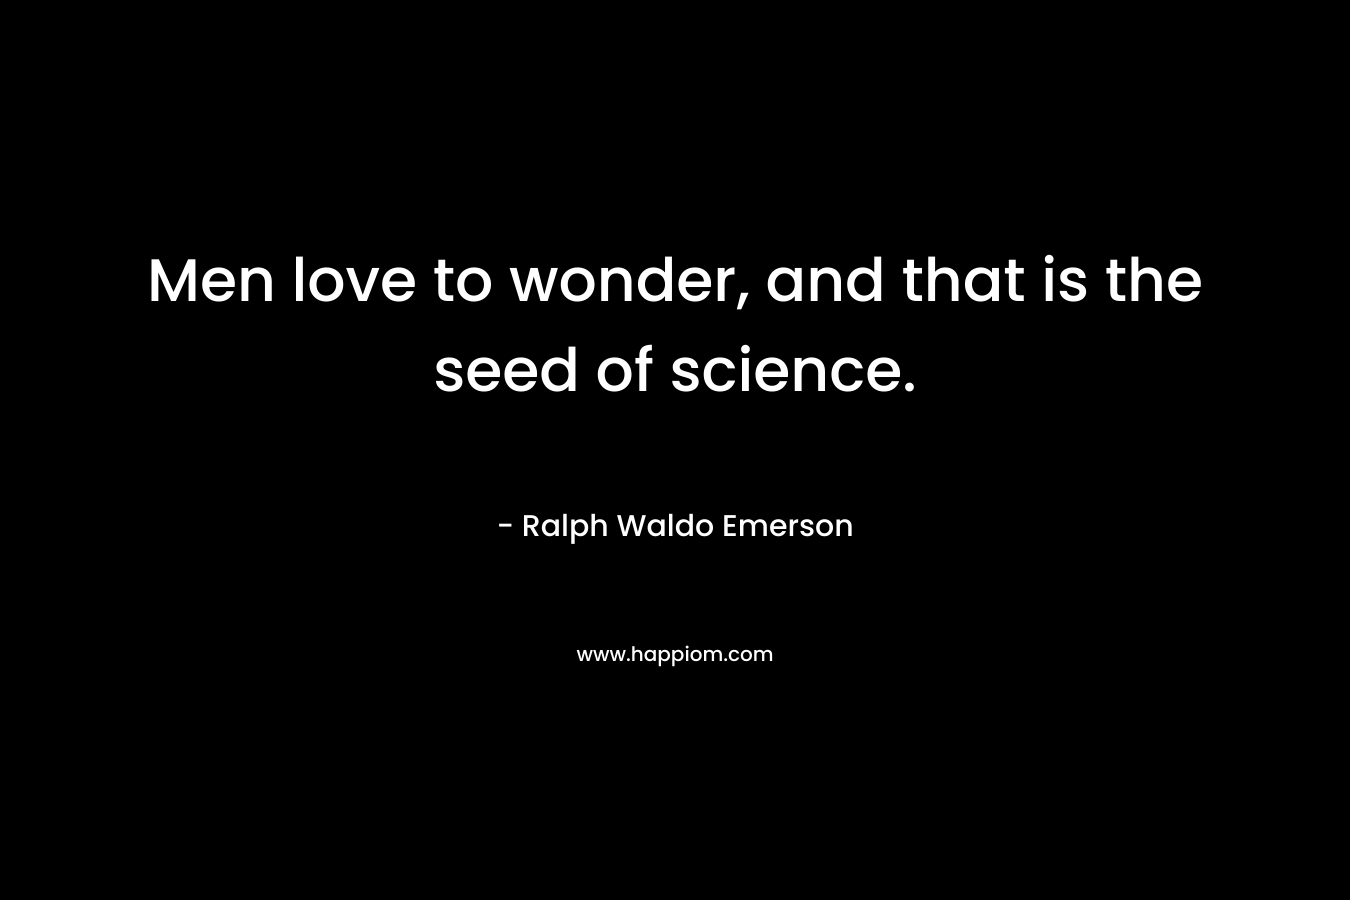 Men love to wonder, and that is the seed of science.